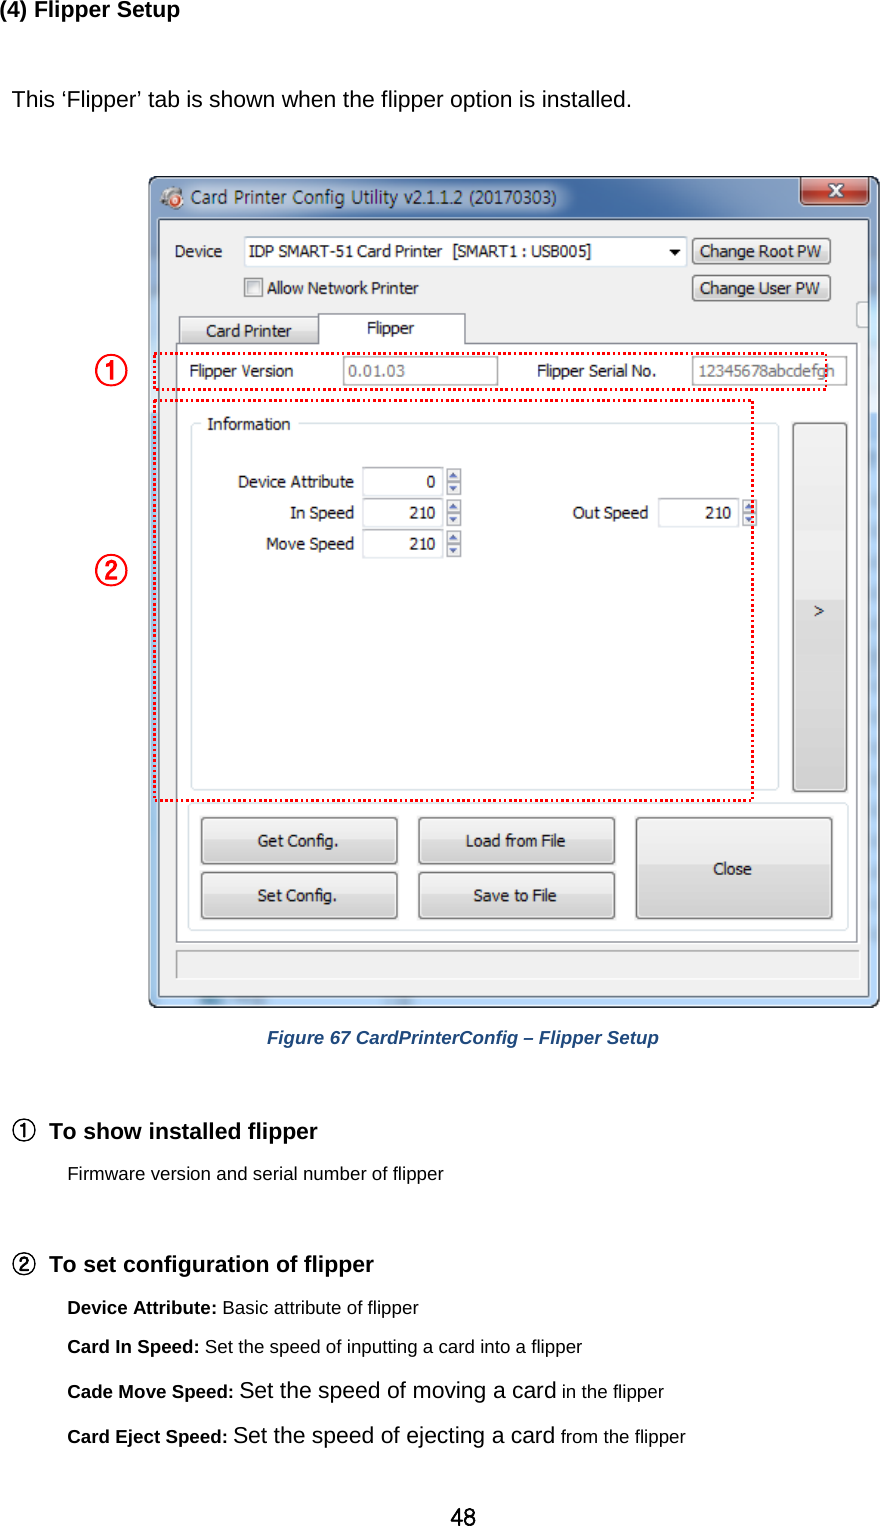 48 (4) Flipper Setup  This ‘Flipper’ tab is shown when the flipper option is installed.   Figure 67 CardPrinterConfig – Flipper Setup  ① To show installed flipper   Firmware version and serial number of flipper  ② To set configuration of flipper Device Attribute: Basic attribute of flipper Card In Speed: Set the speed of inputting a card into a flipper Cade Move Speed: Set the speed of moving a card in the flipper Card Eject Speed: Set the speed of ejecting a card from the flipper    ① ② 